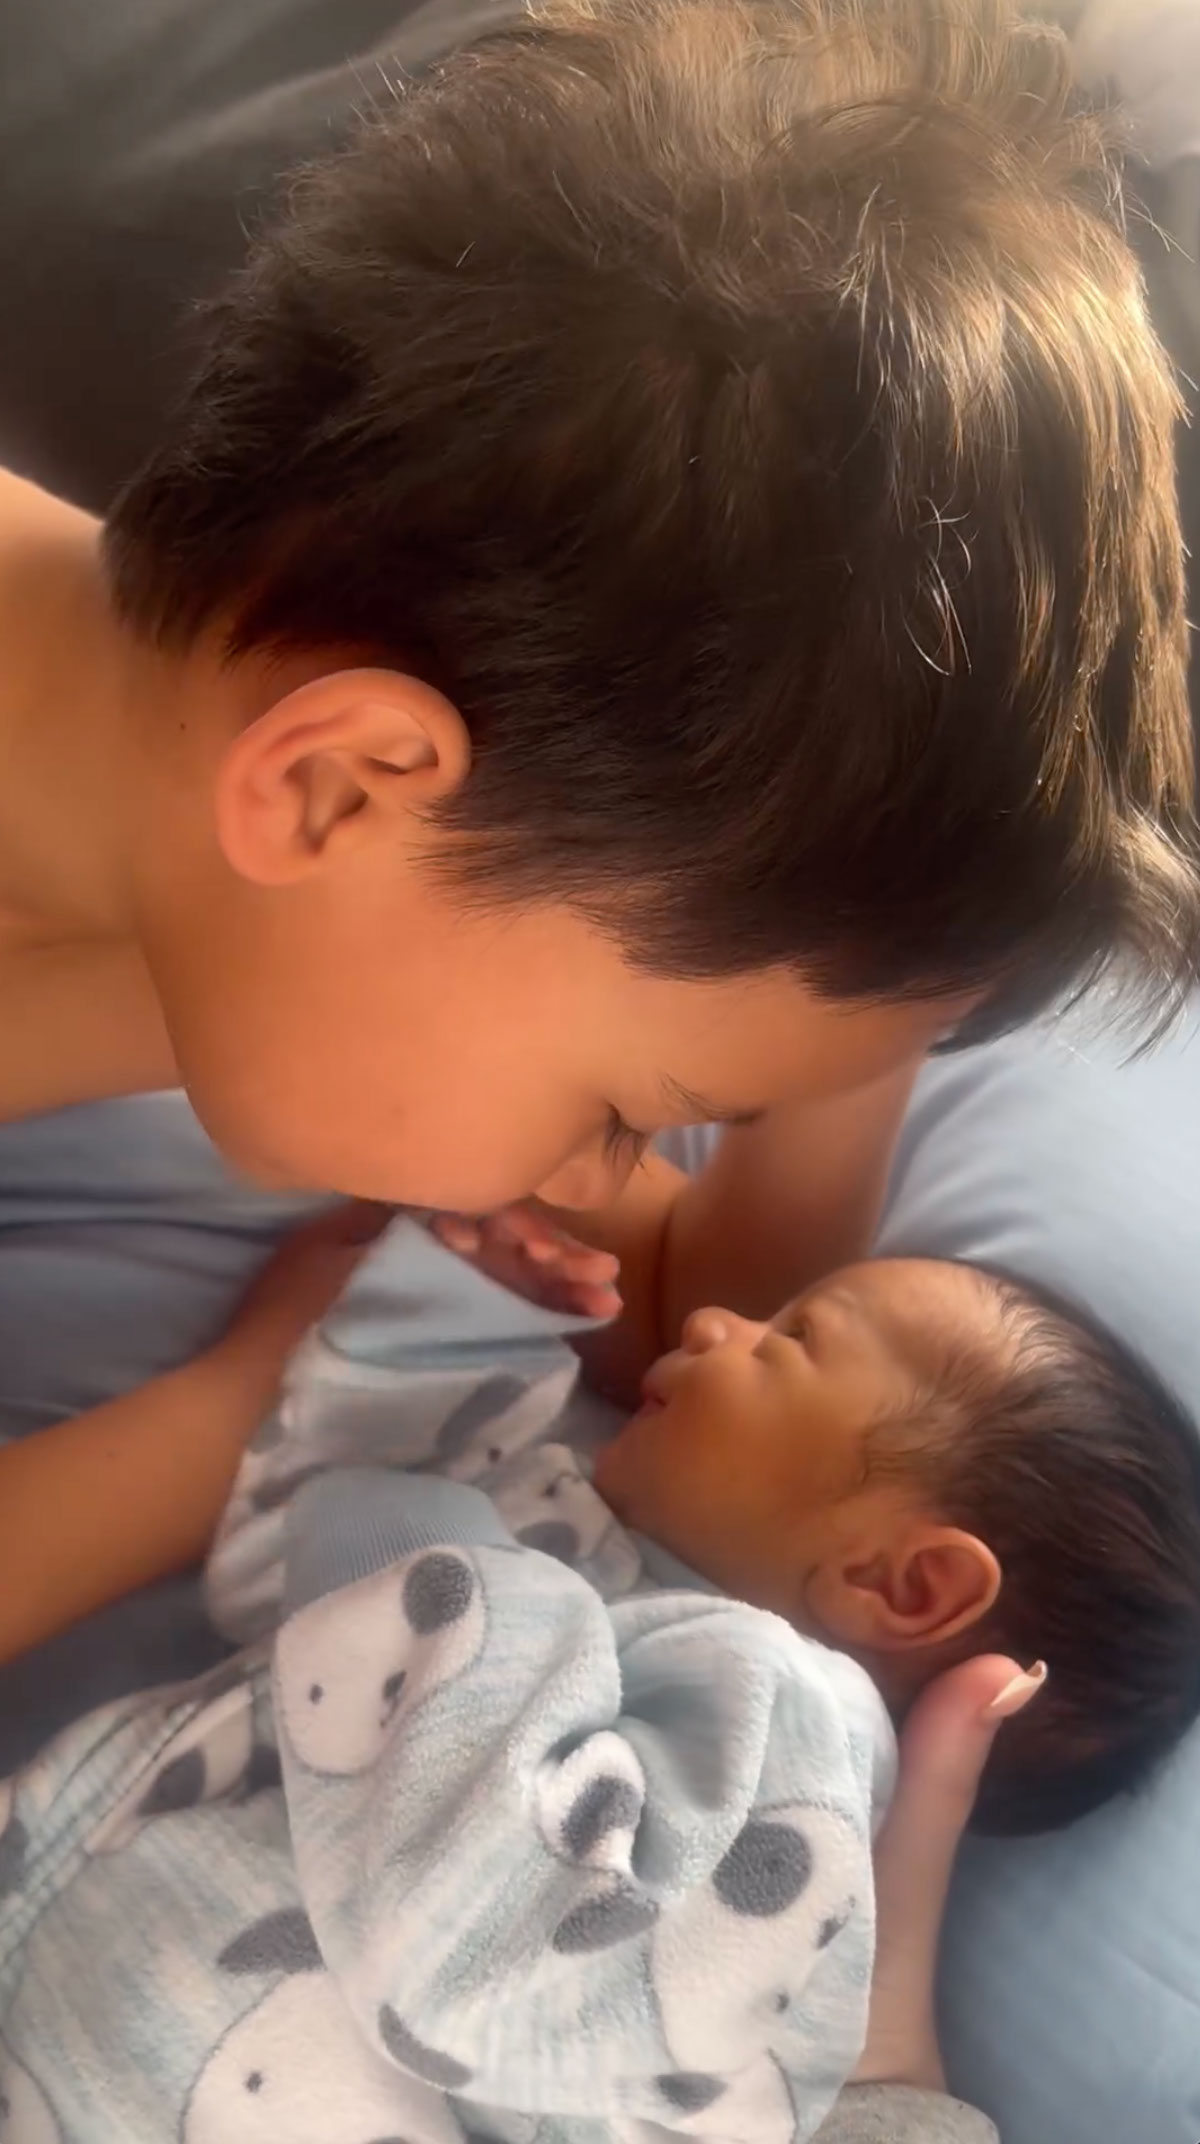 Kayla shared a sweet video of Izaiah playing with his baby brother Zyaire